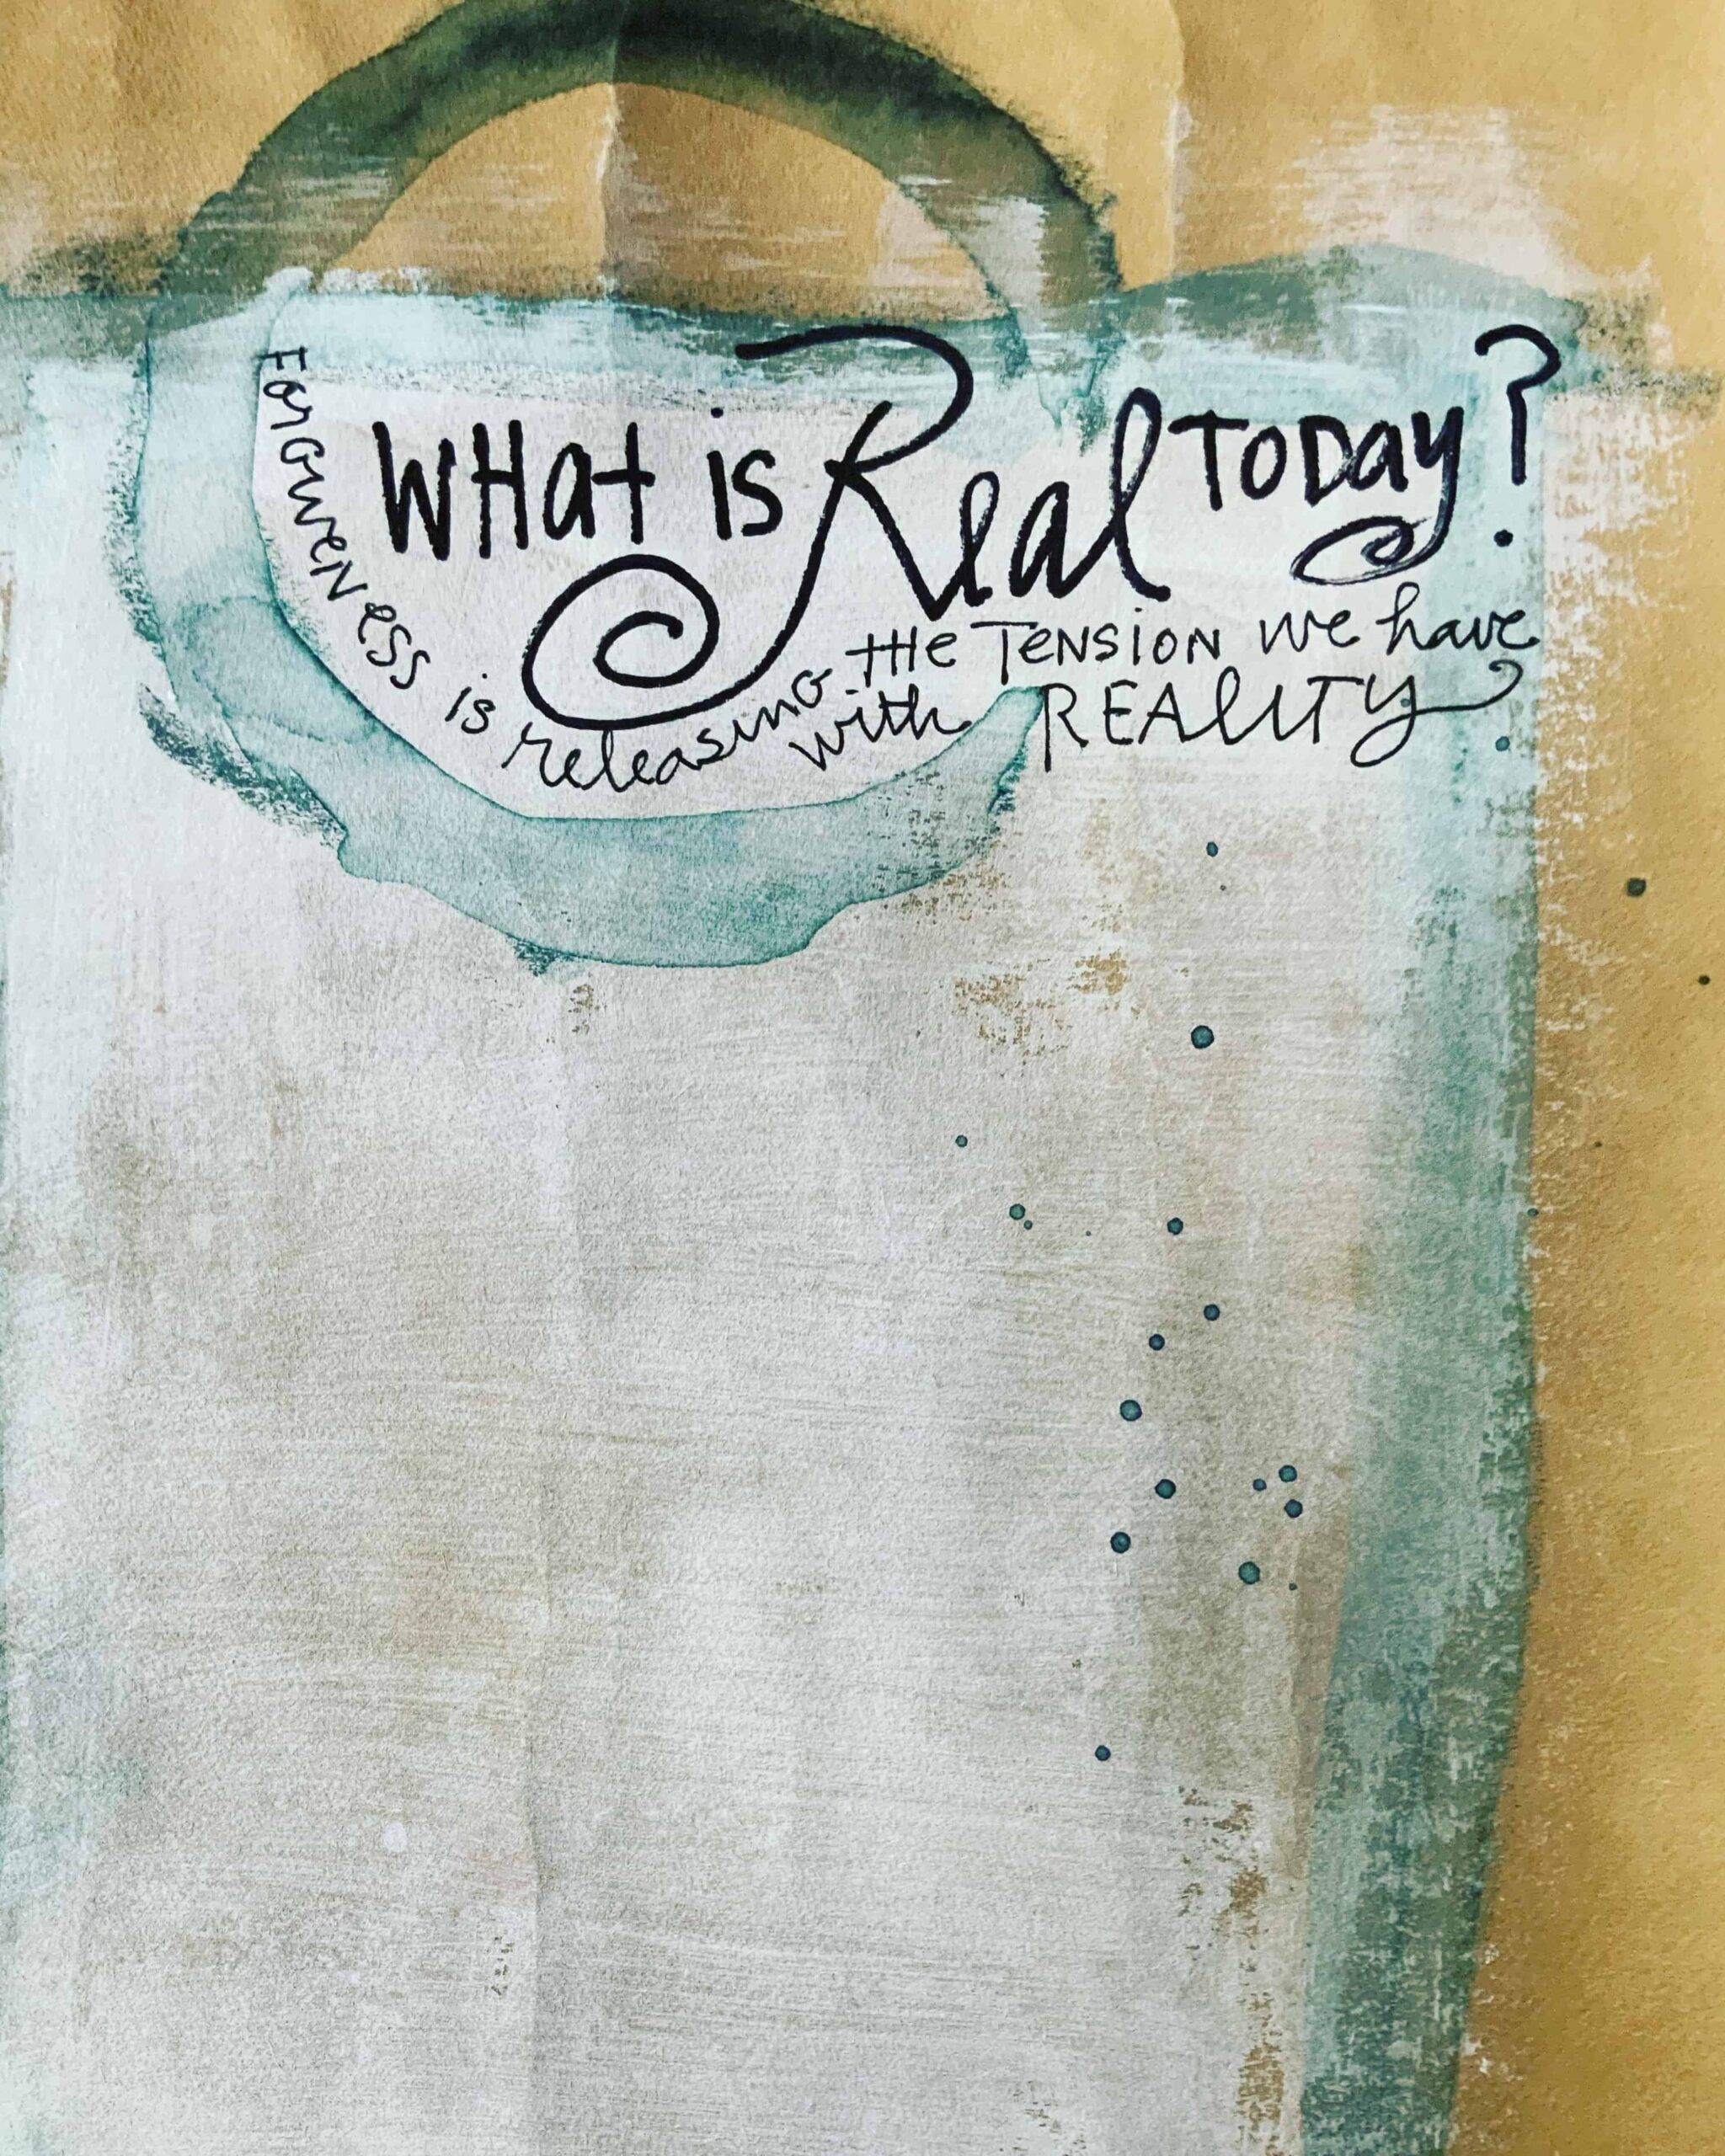 A journal page by Betsy Cañas Garmon with handwritten text that says, "What is real today?"